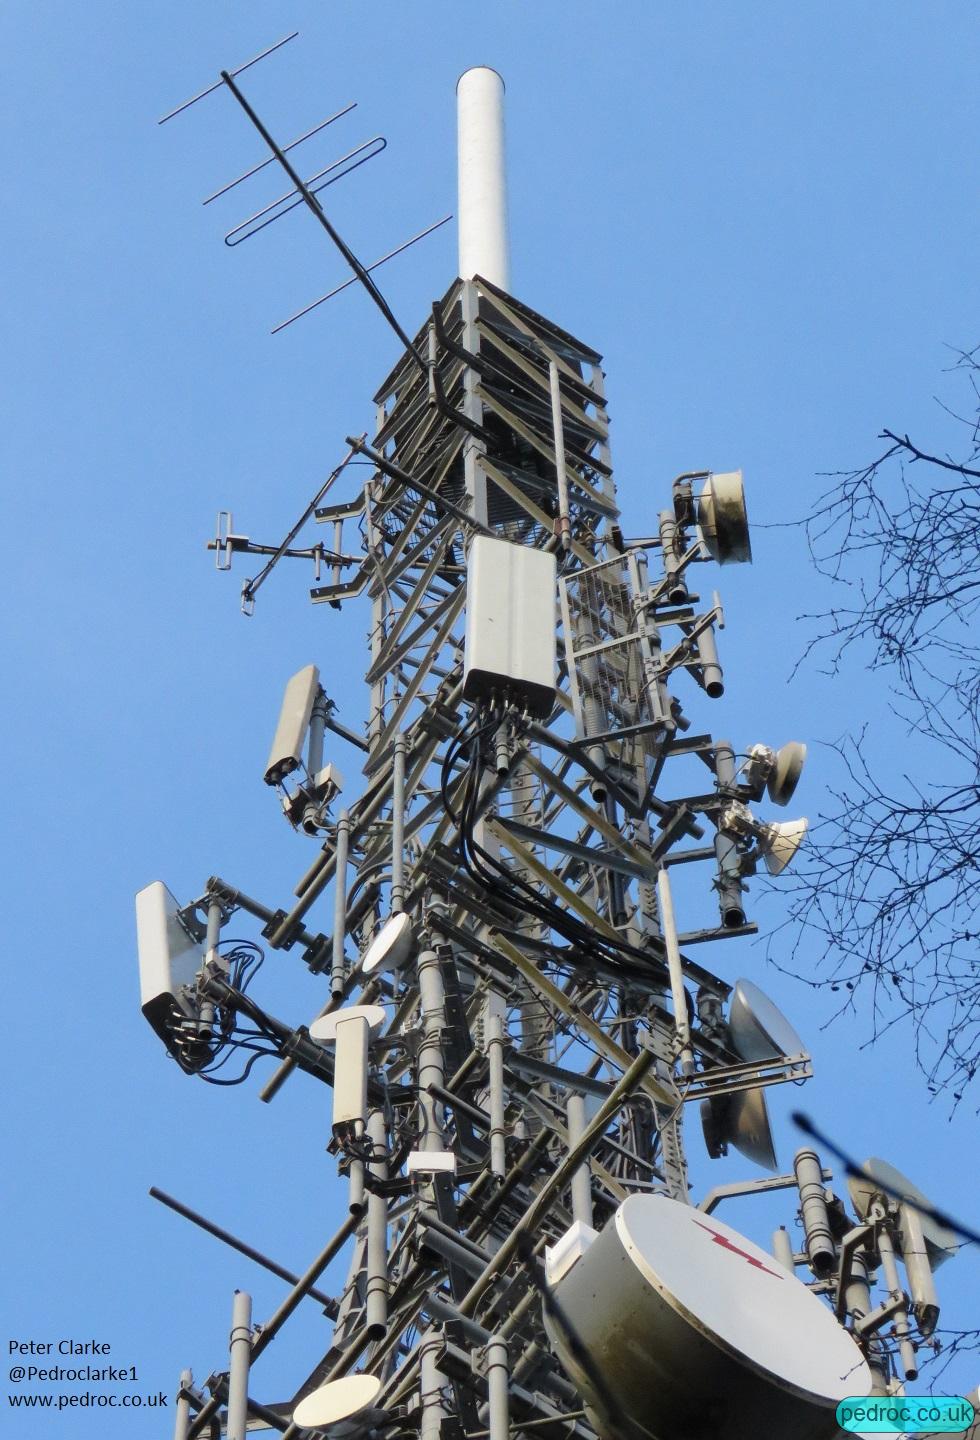 Downtilited Commscope Quad Band antennas have O2 Nokia Host, VF Sharer. Uptilted legacy VF G09 panels are not live. Lower single high band Kathreins are for EE GL18.